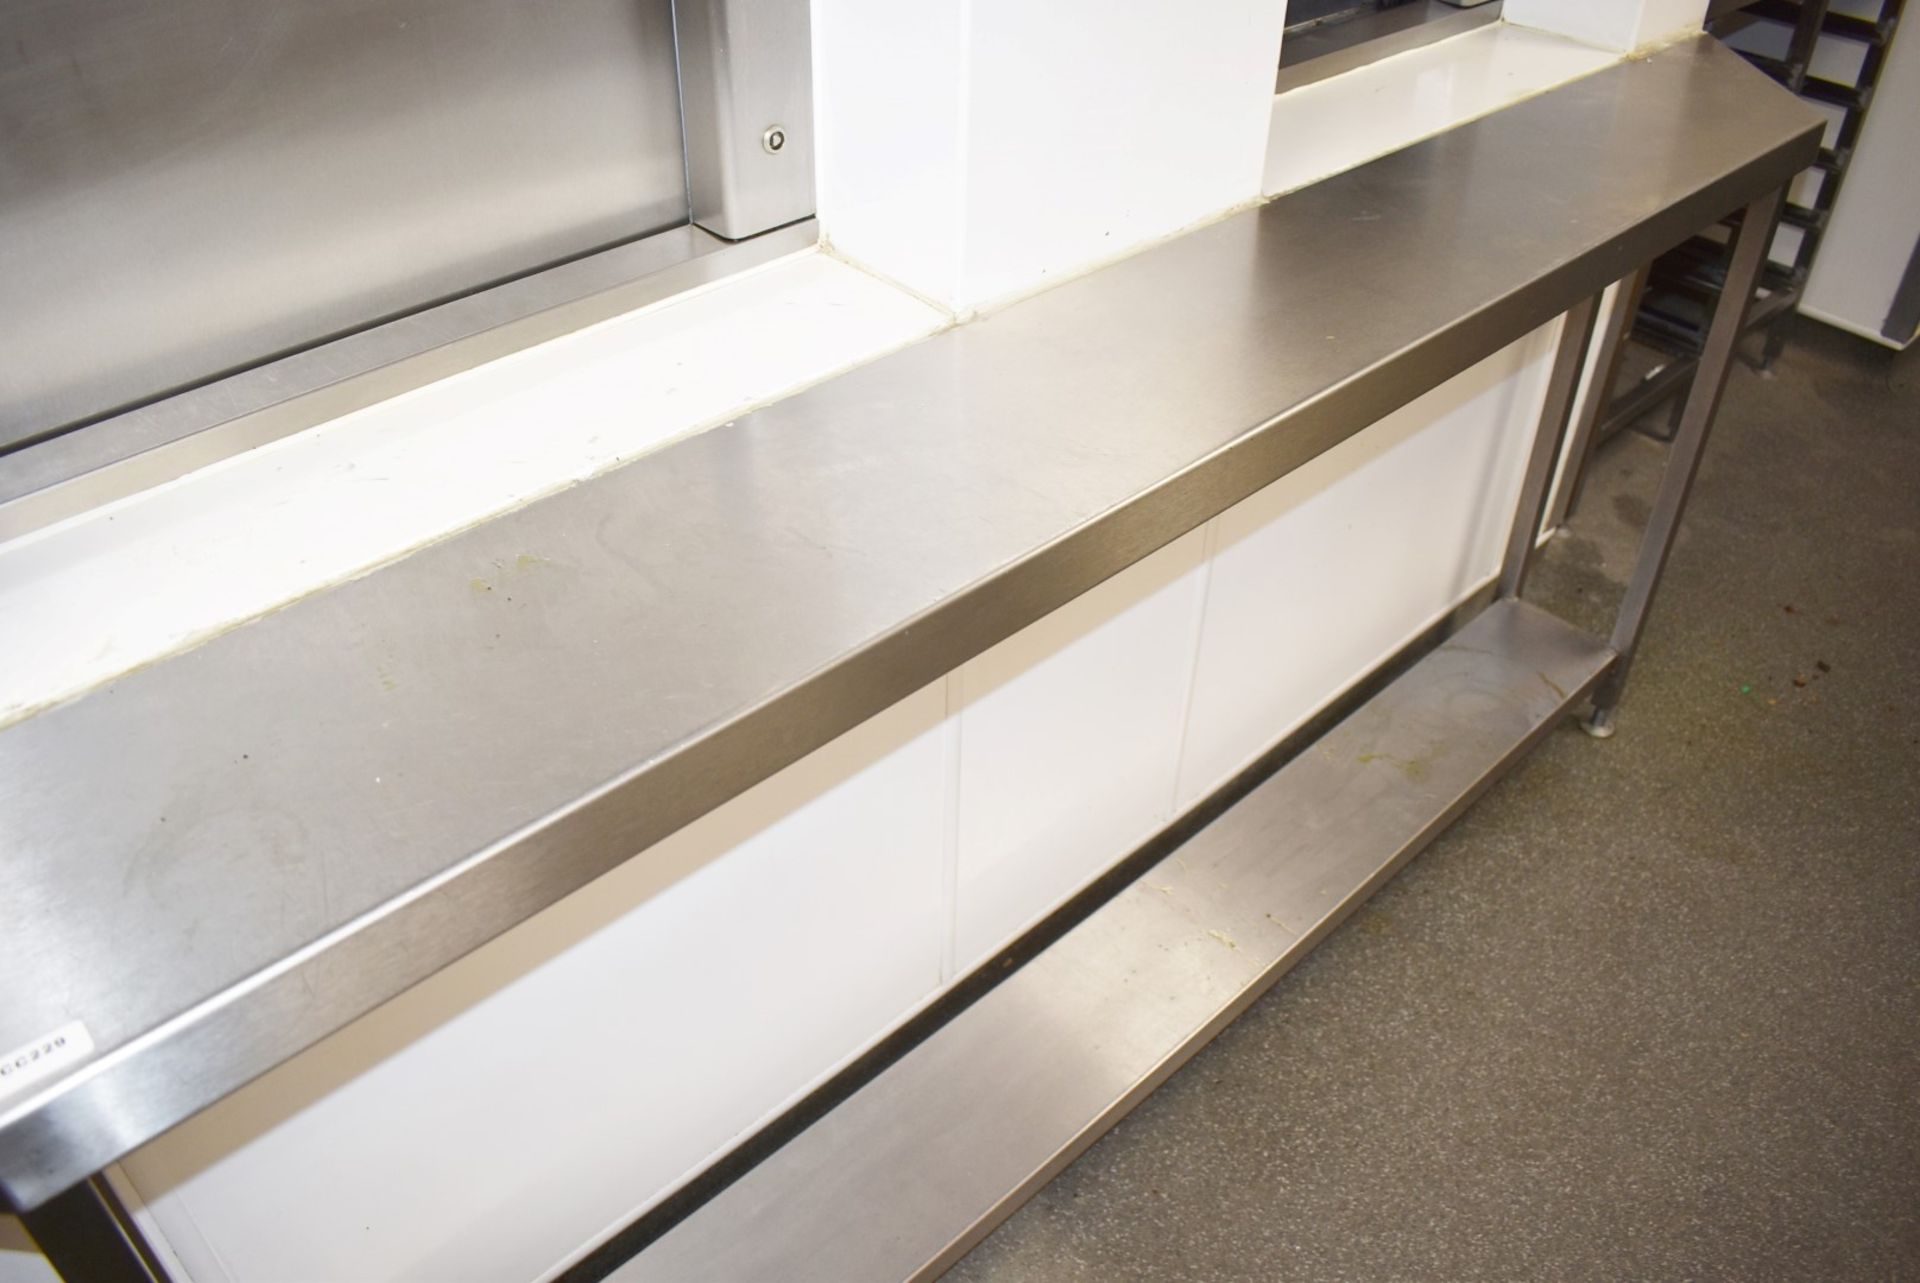 1 x Stainless Steel Prep Bench With Undershelf and Shaped Ends - Size: H88 x W235 x D25 cms - Image 2 of 2